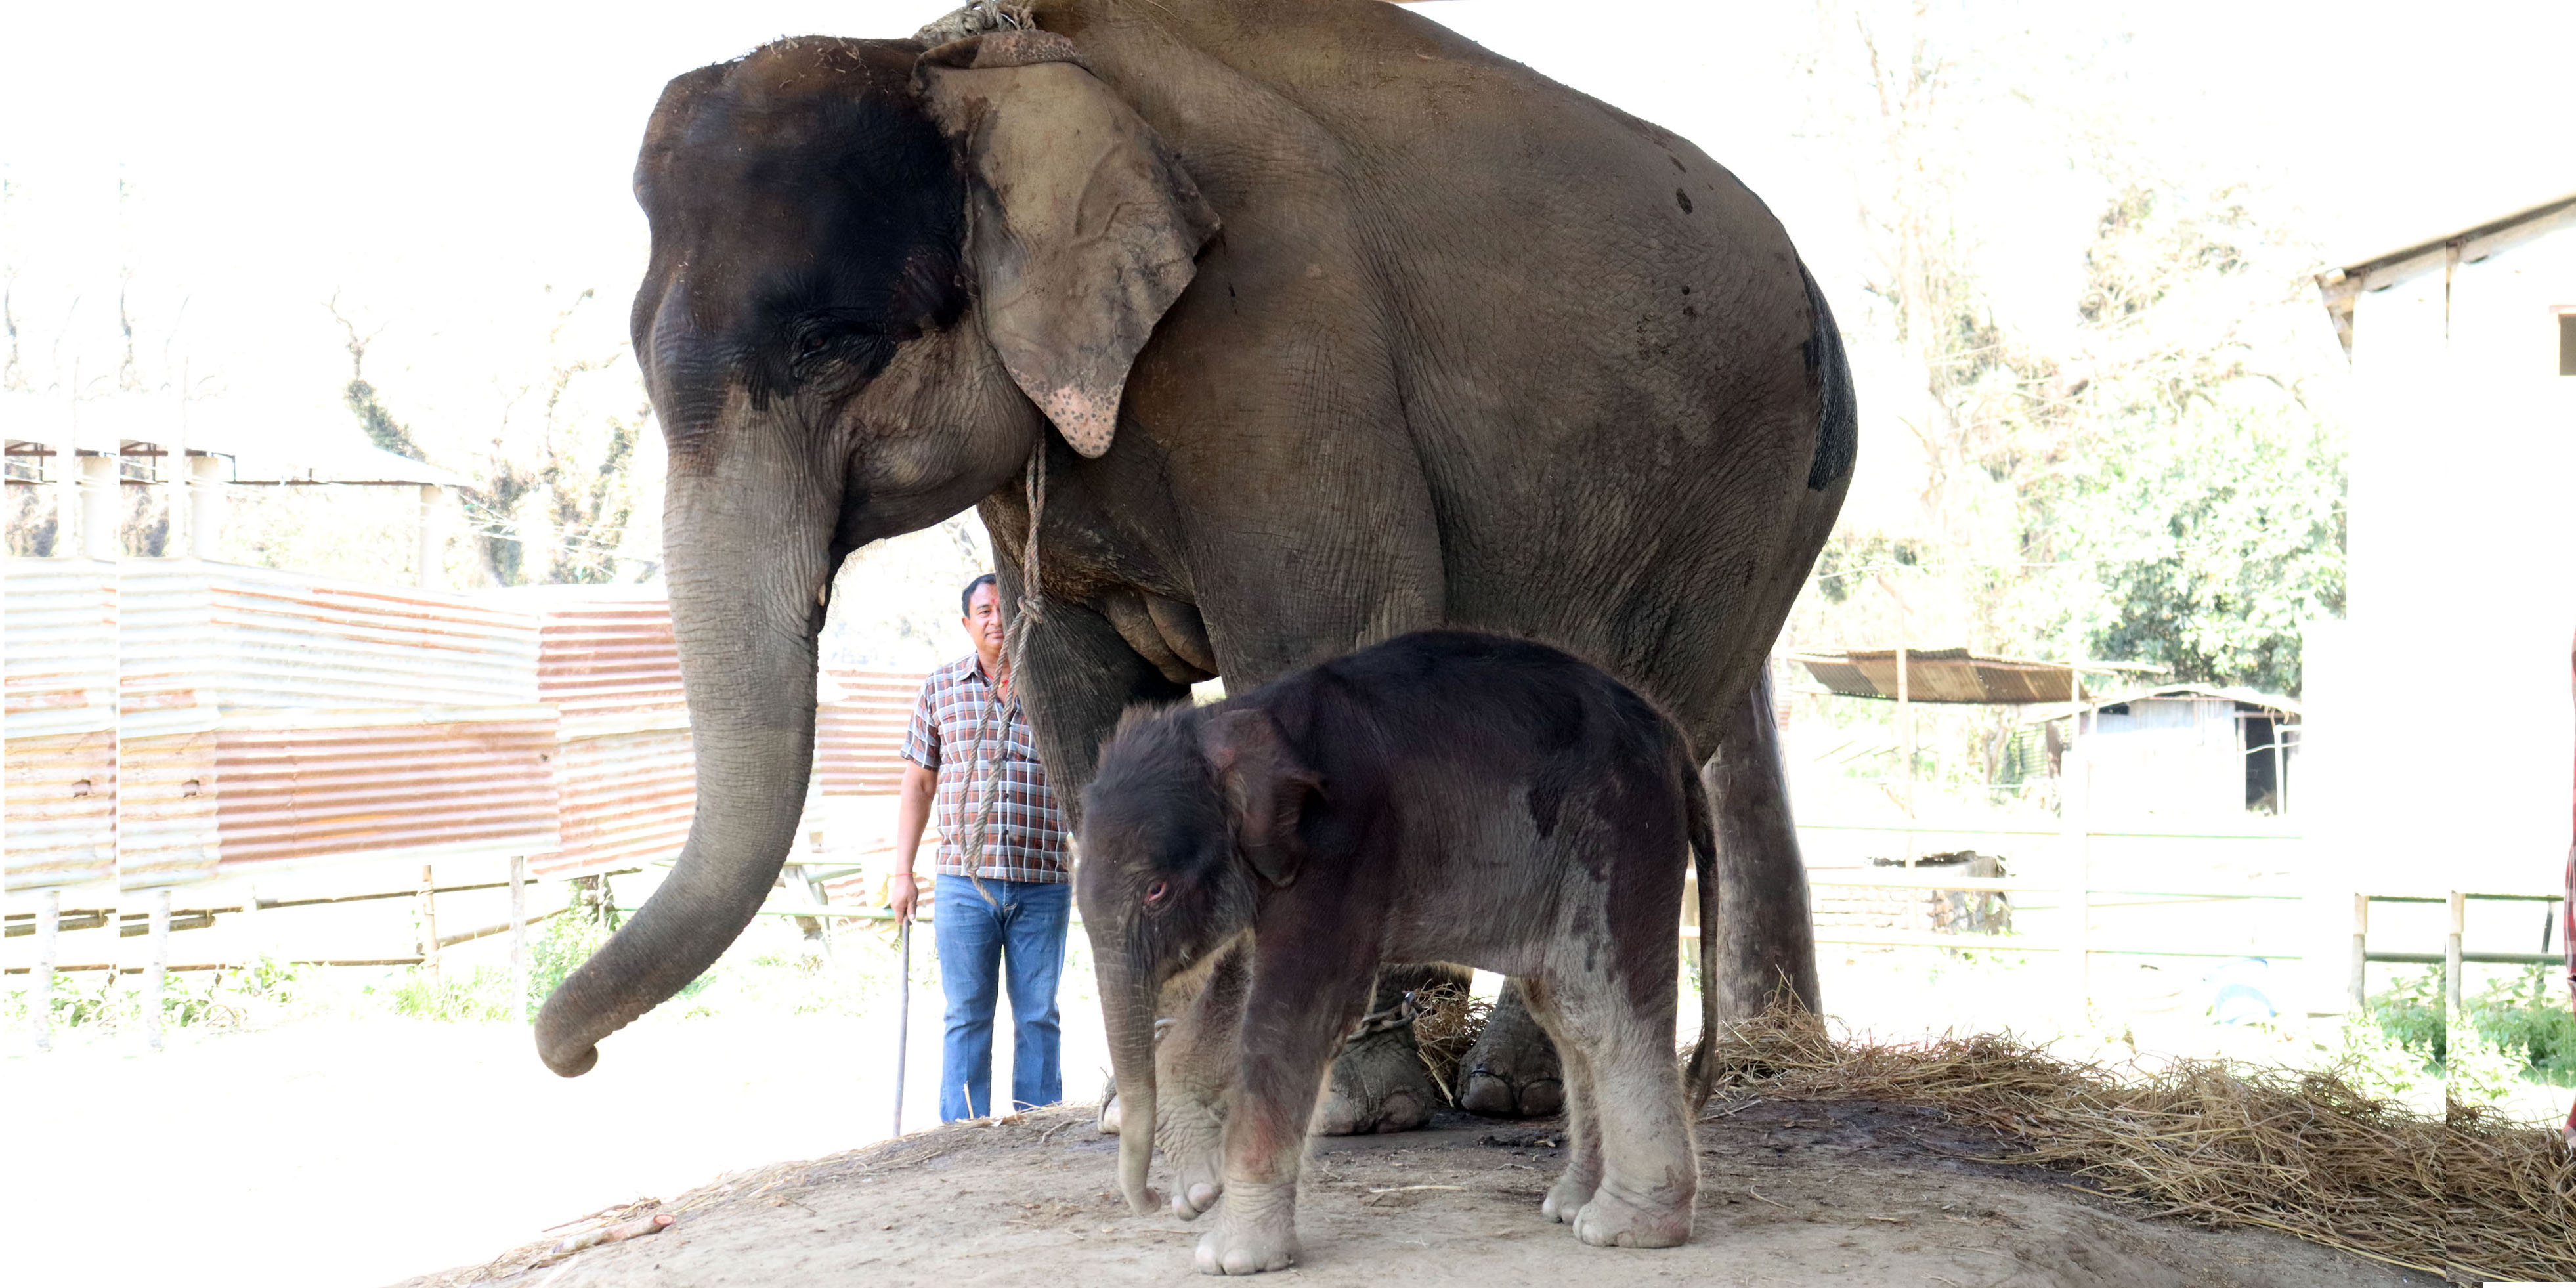 Historic c-section performed on elephant at Chitwan National Park